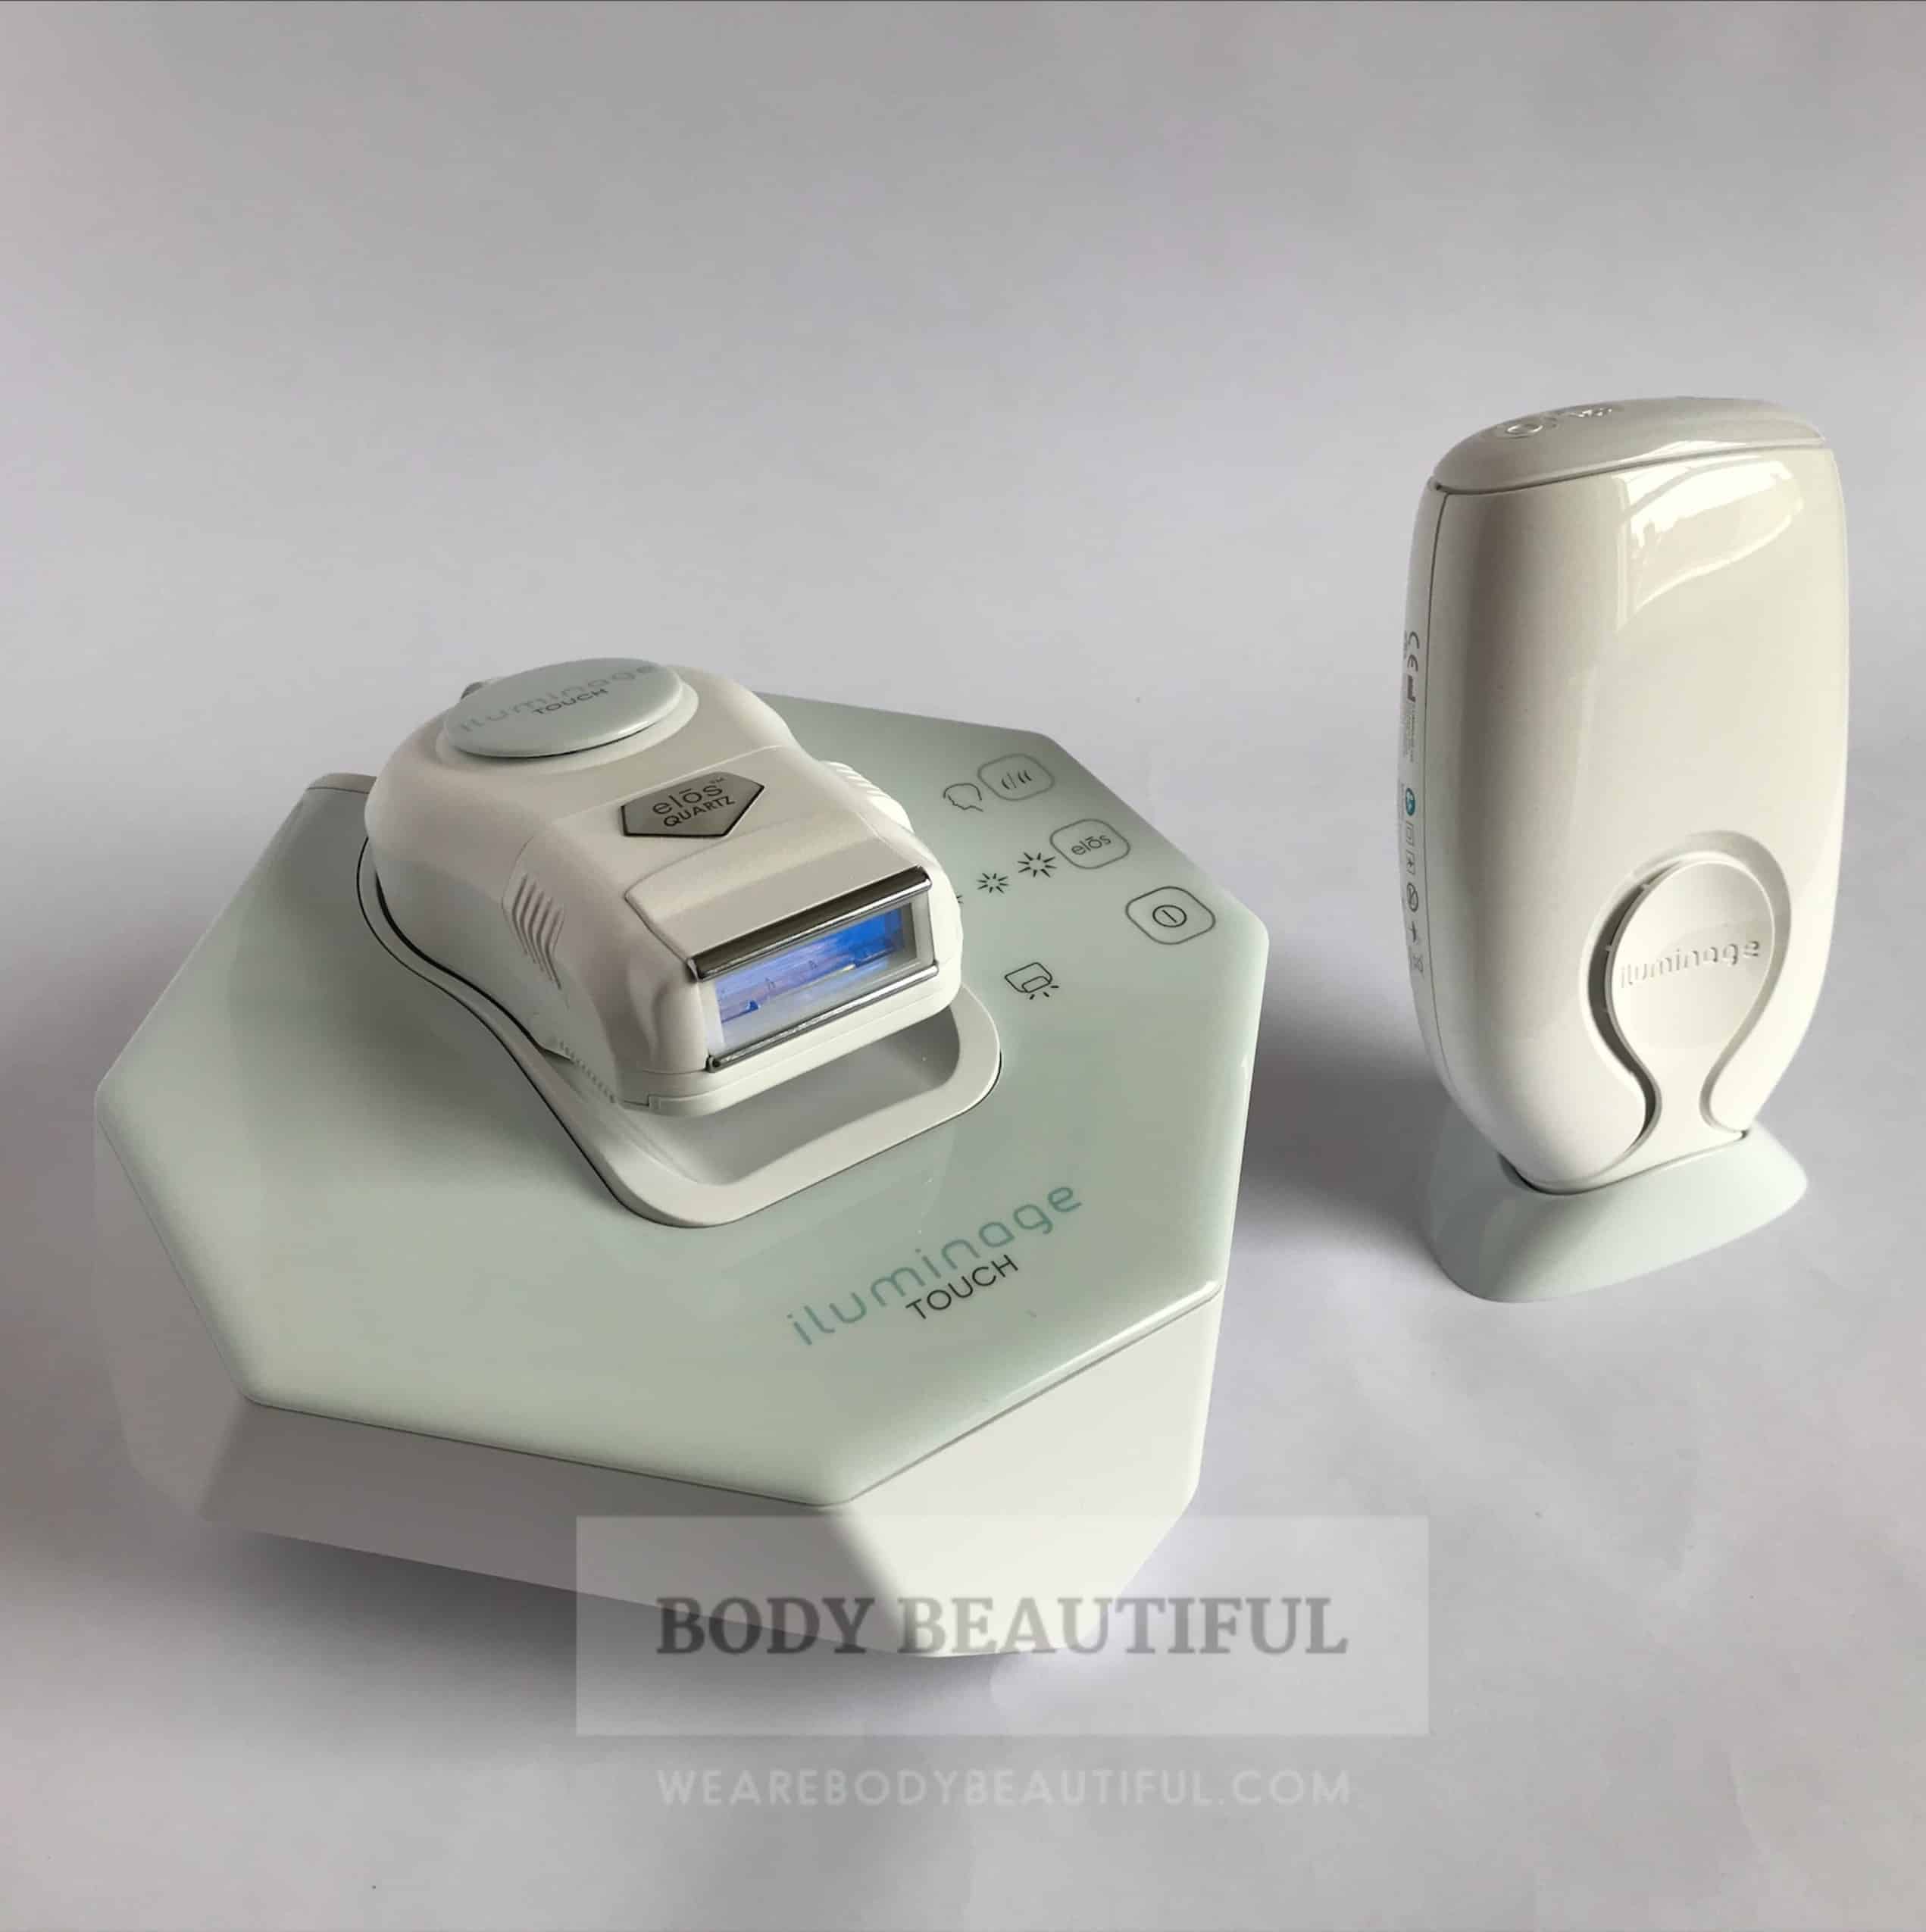 Iluminage Devices: Best IPL & RF home hair removal system for fair hair